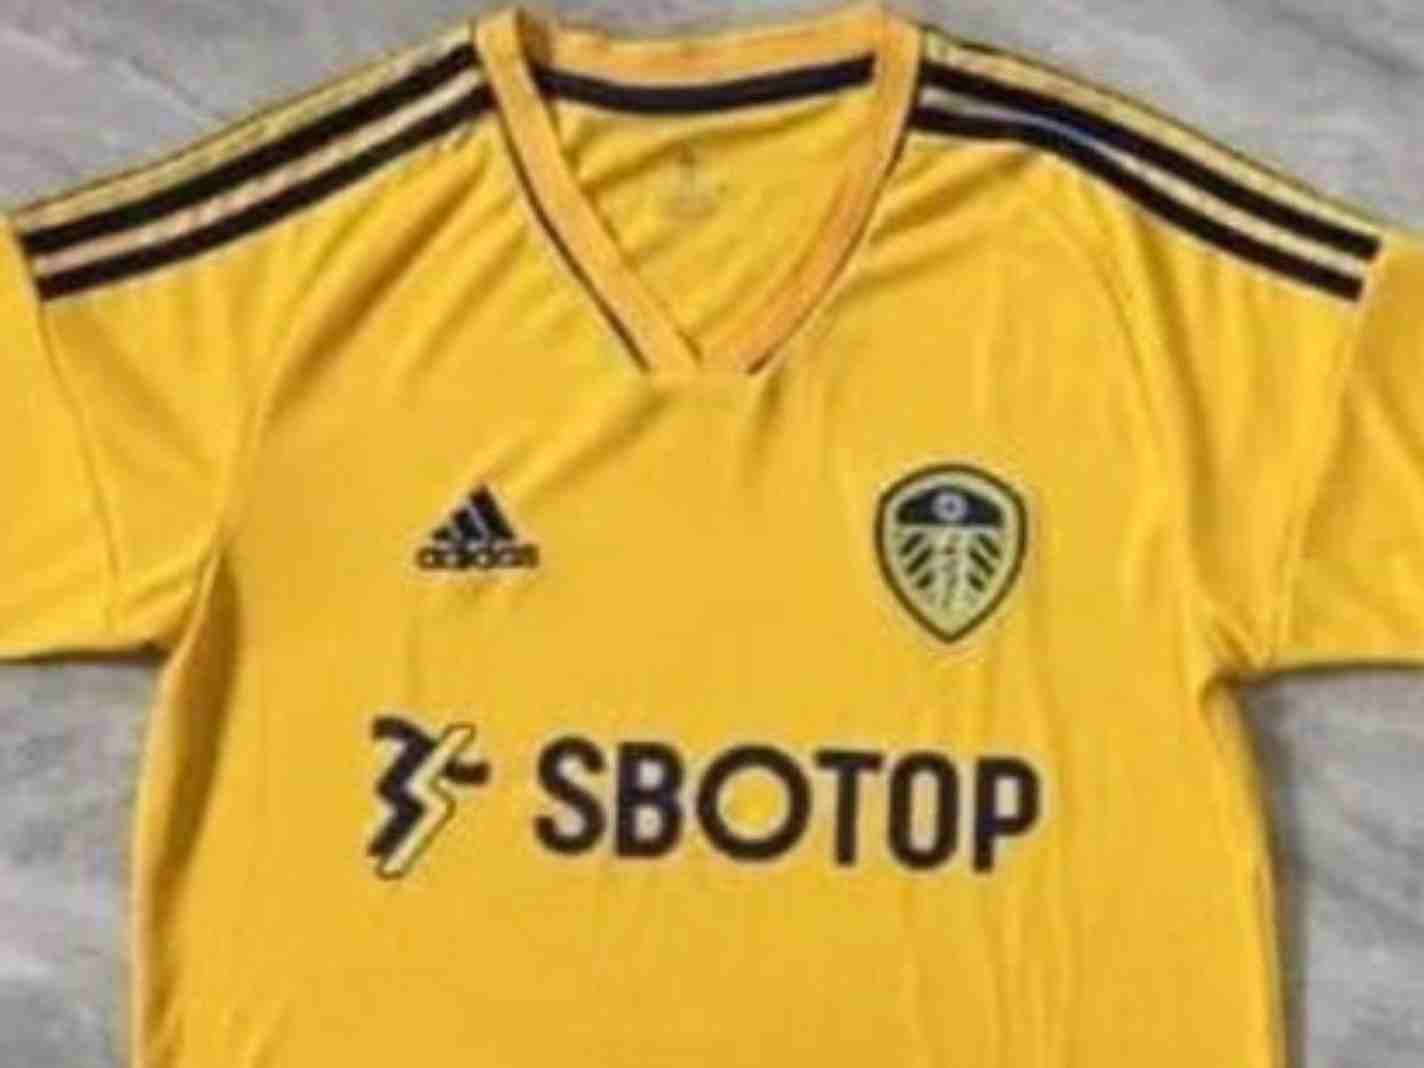 Gossip: Leeds United could return to yellow for 22/23 away kit